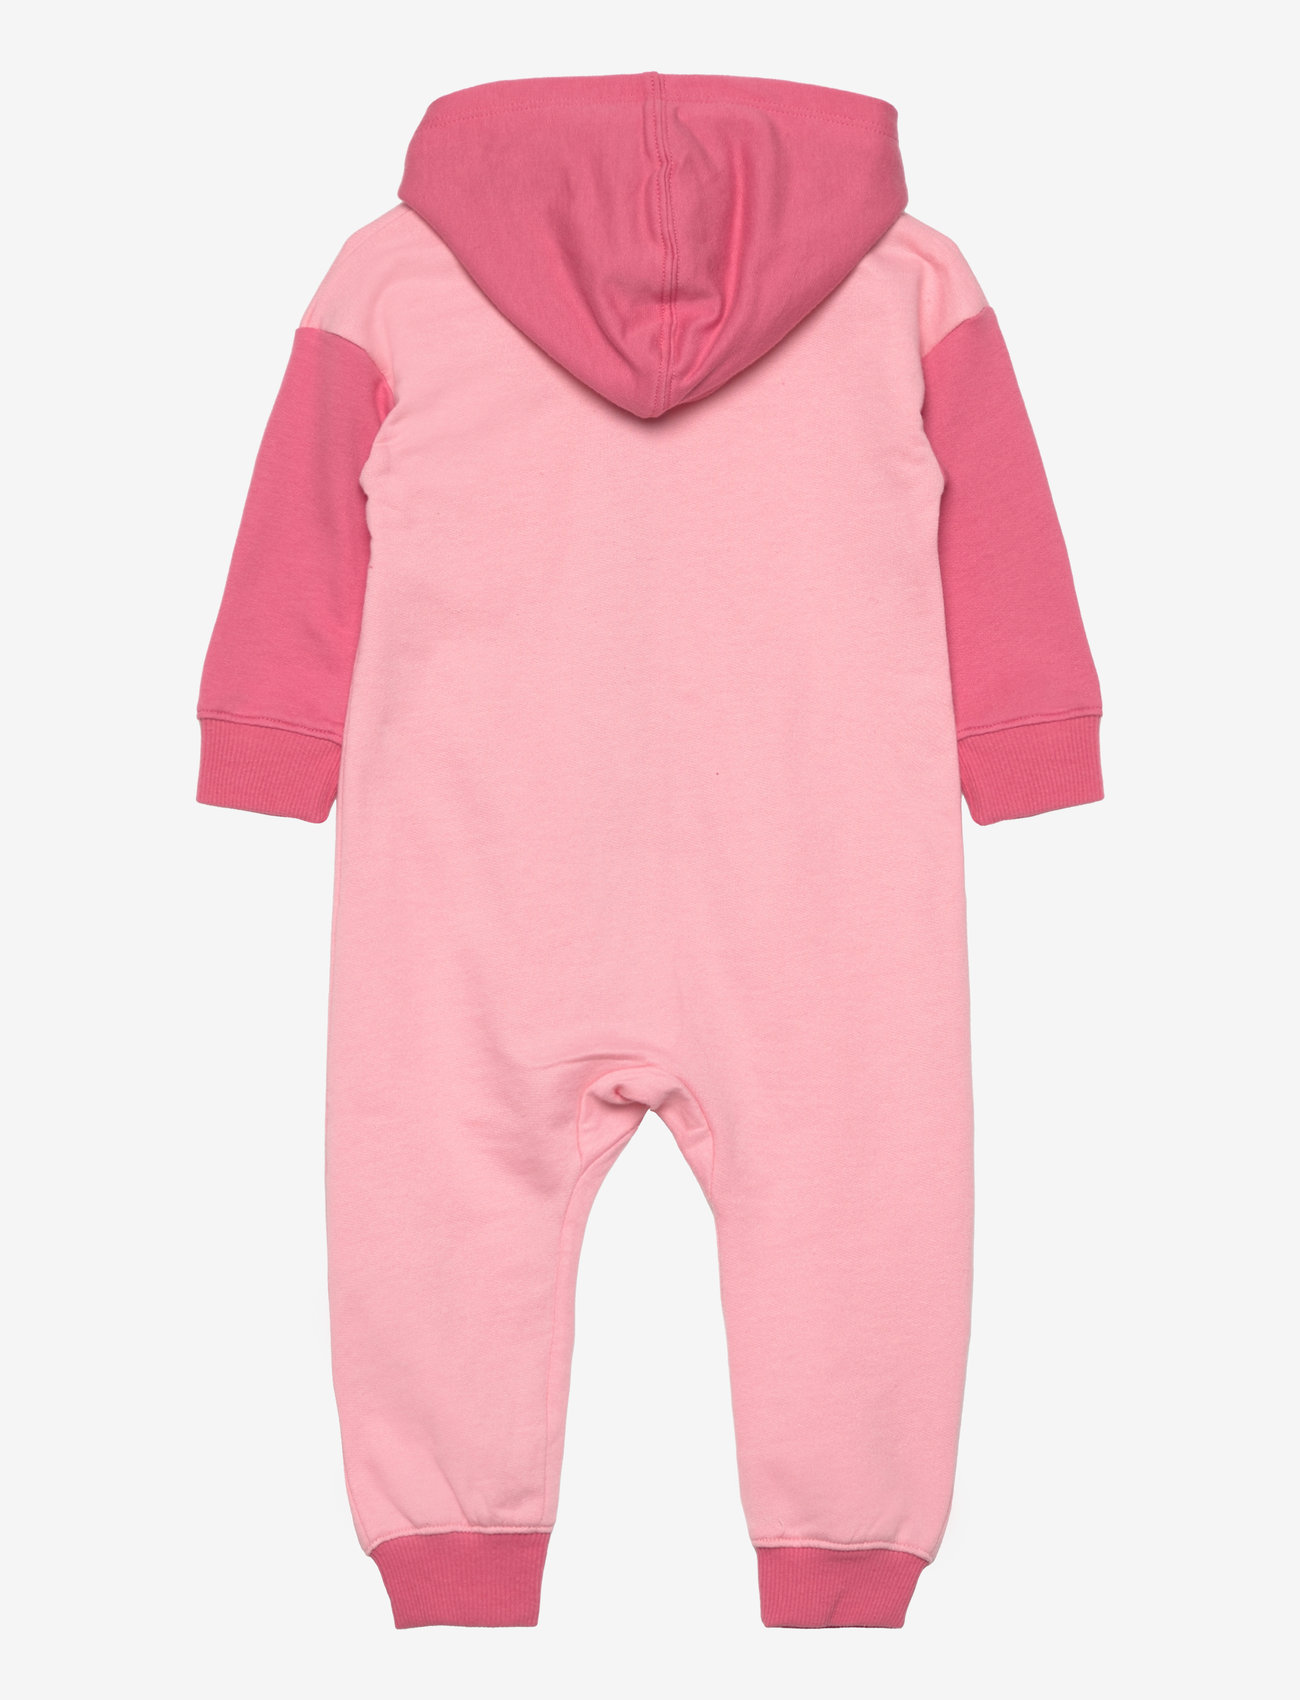 Levi's - Levi's® Colorblocked Hooded Coverall - byxdress - pink - 1